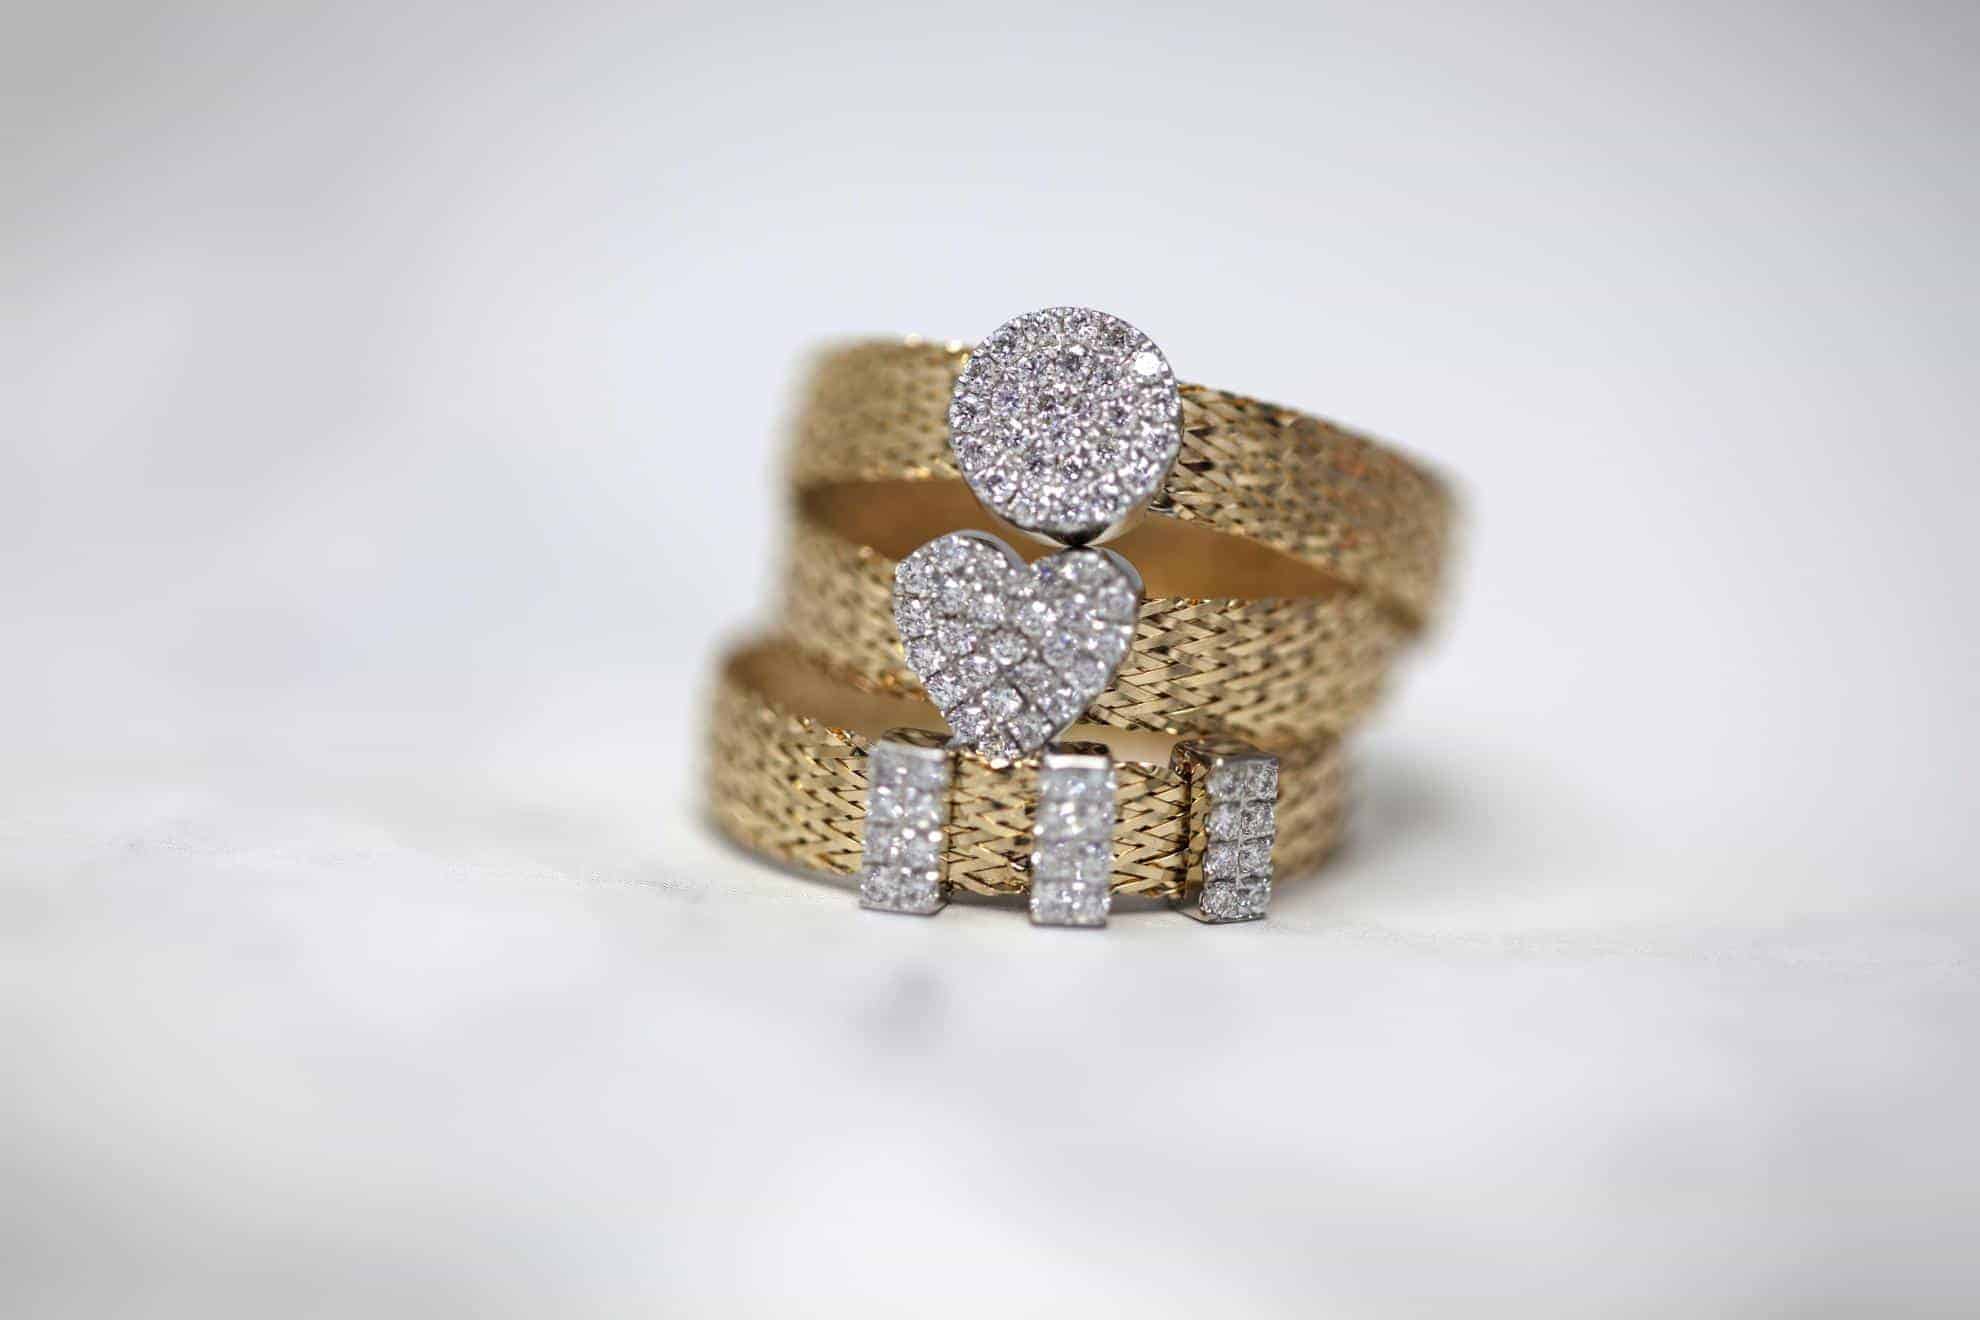 How To Care For Vintage Jewelry Especially Engagement Rings